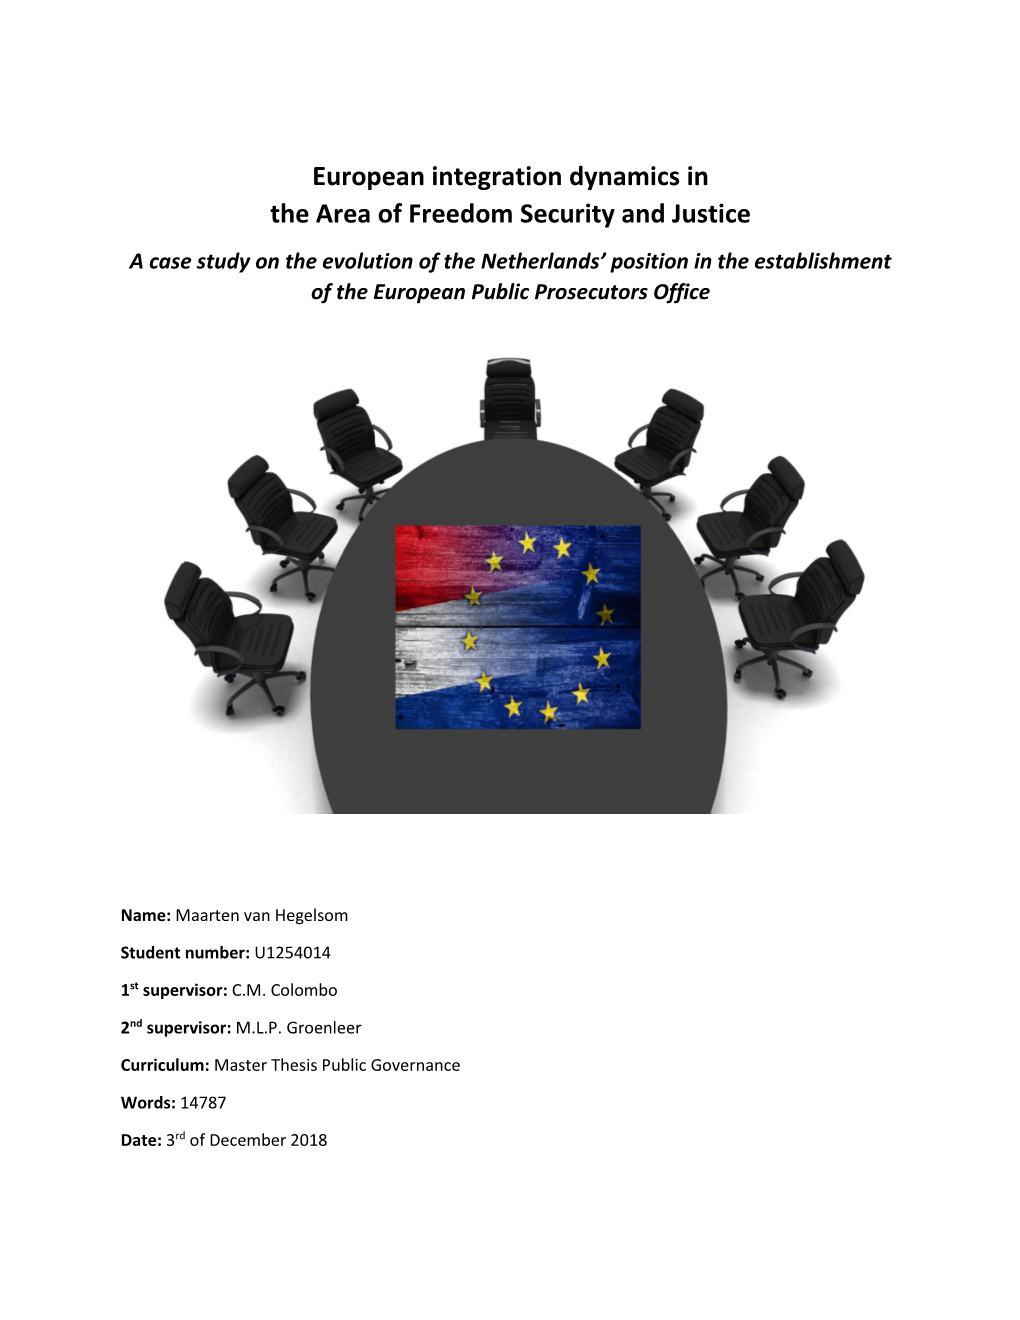 European Integration Dynamics in the Area of Freedom Security and Justice